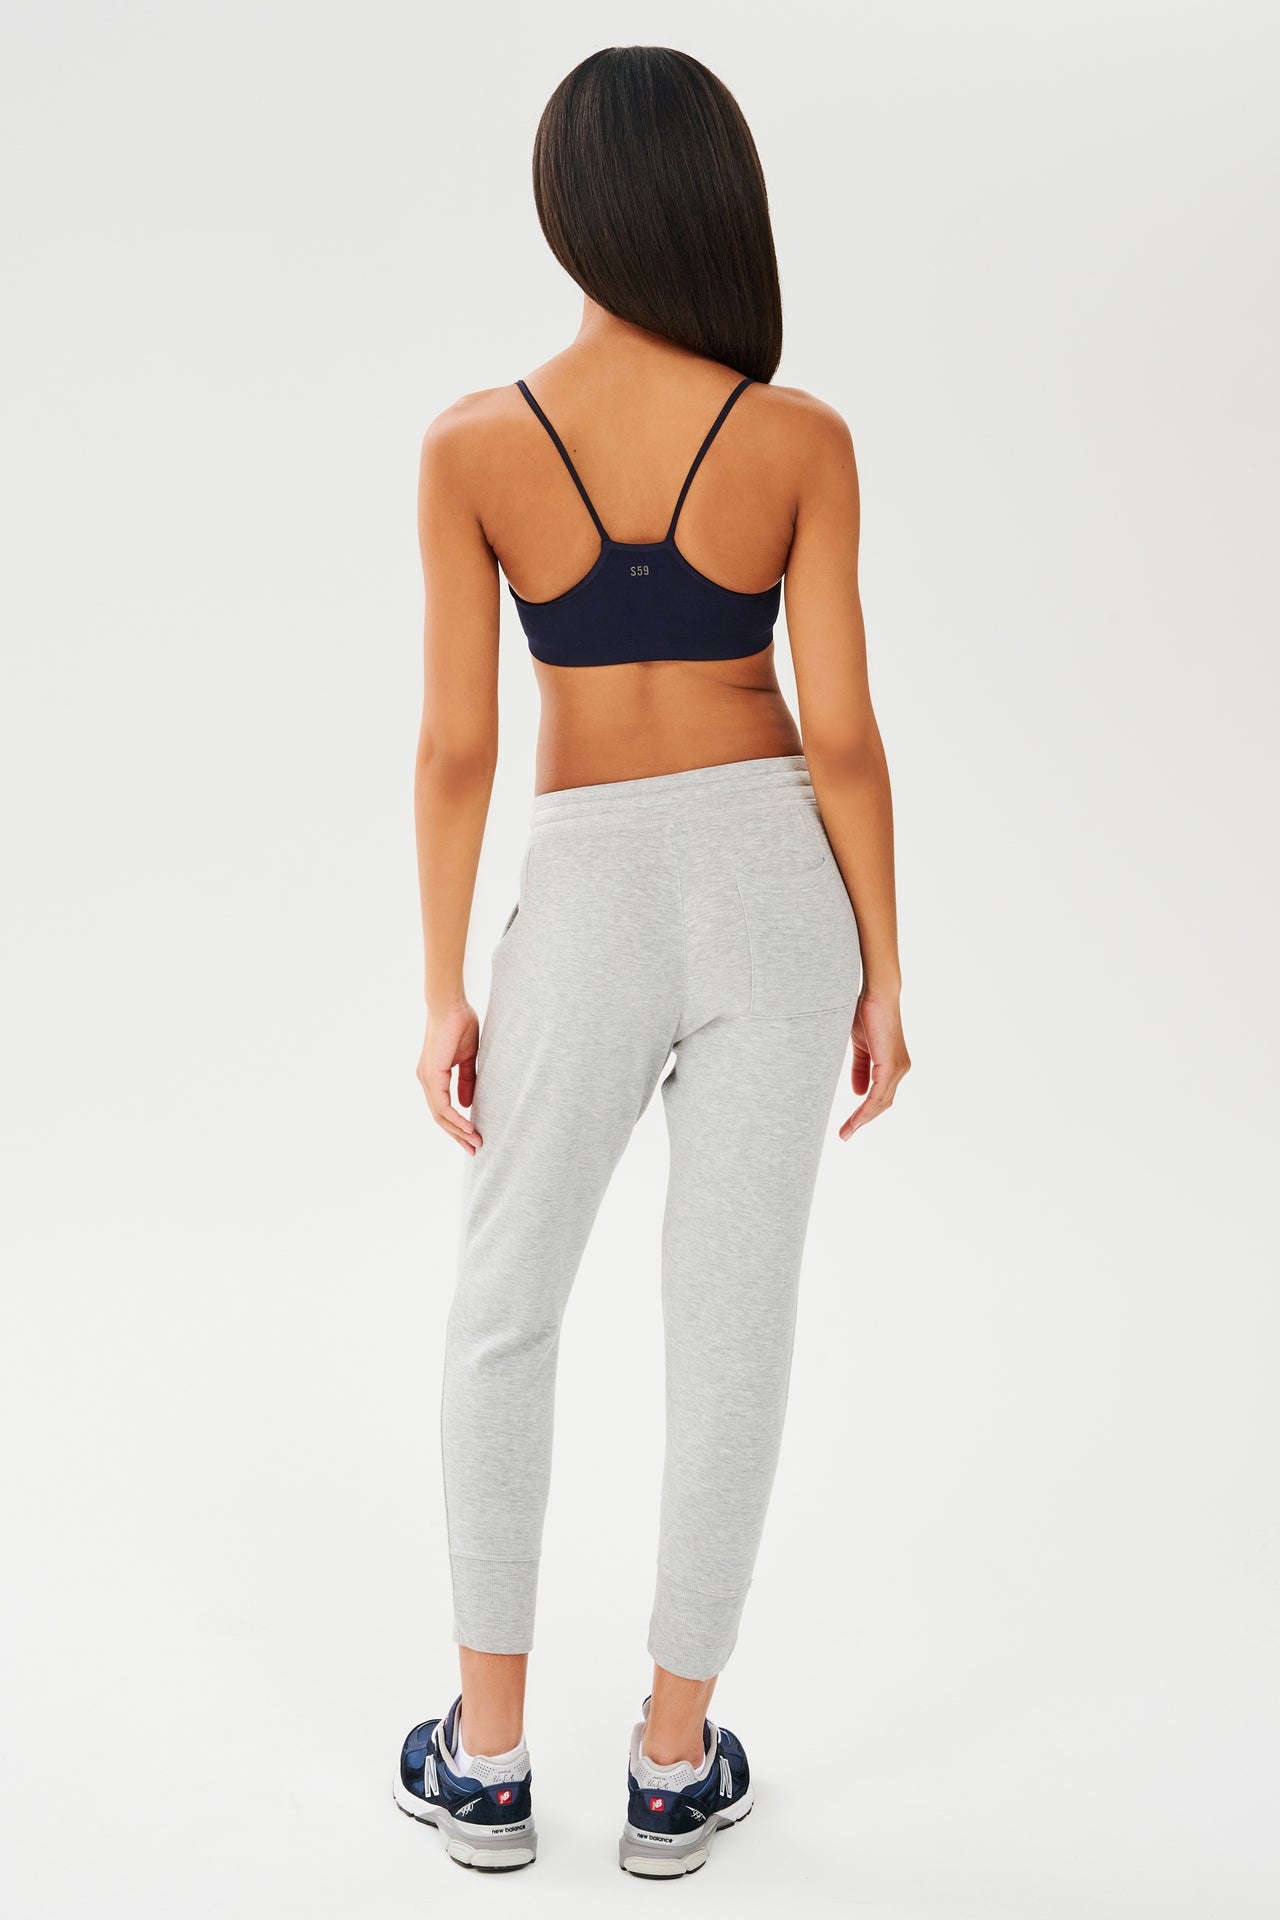 The back view of a woman wearing a SPLITS59 Loren Seamless Bra in Indigo and joggers.